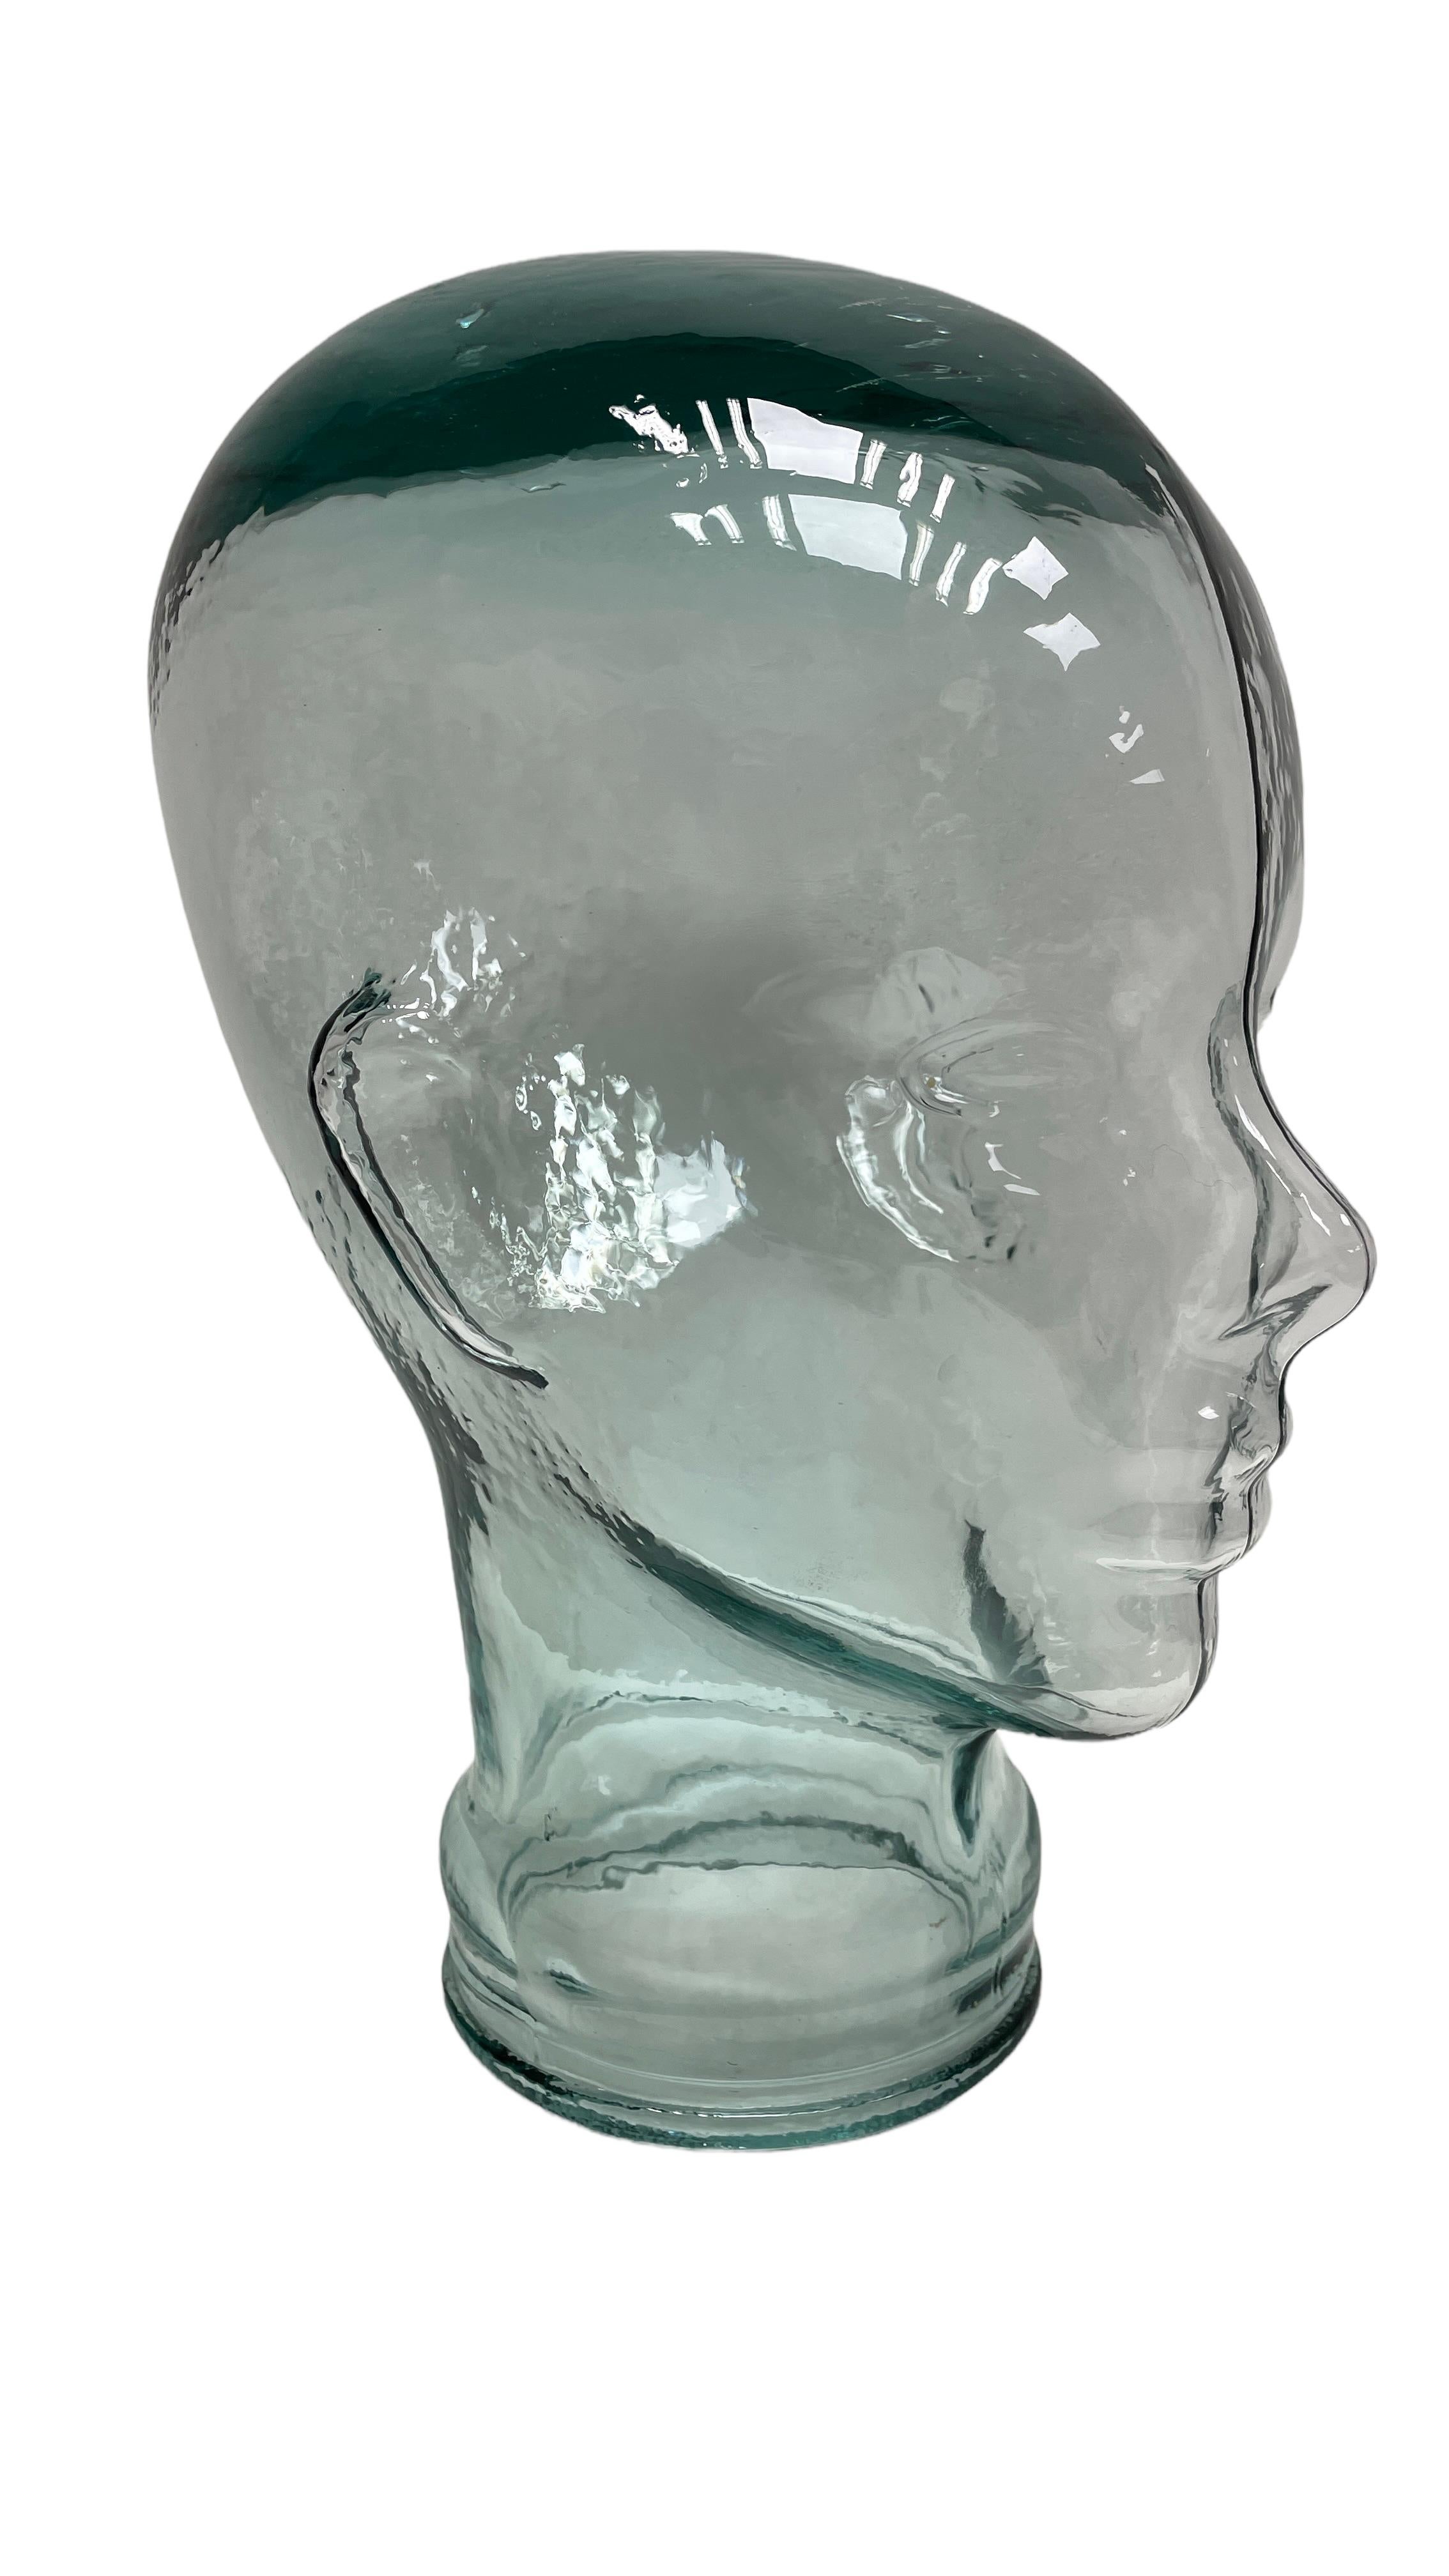 Beautiful Life-size glass head in a unique transparent color. Found at an Estate sale in Vienna Austria. Perfect condition. A perfect addition to the interior, photo prop, display or headphone stand. A beautiful nice addition and decorative piece in